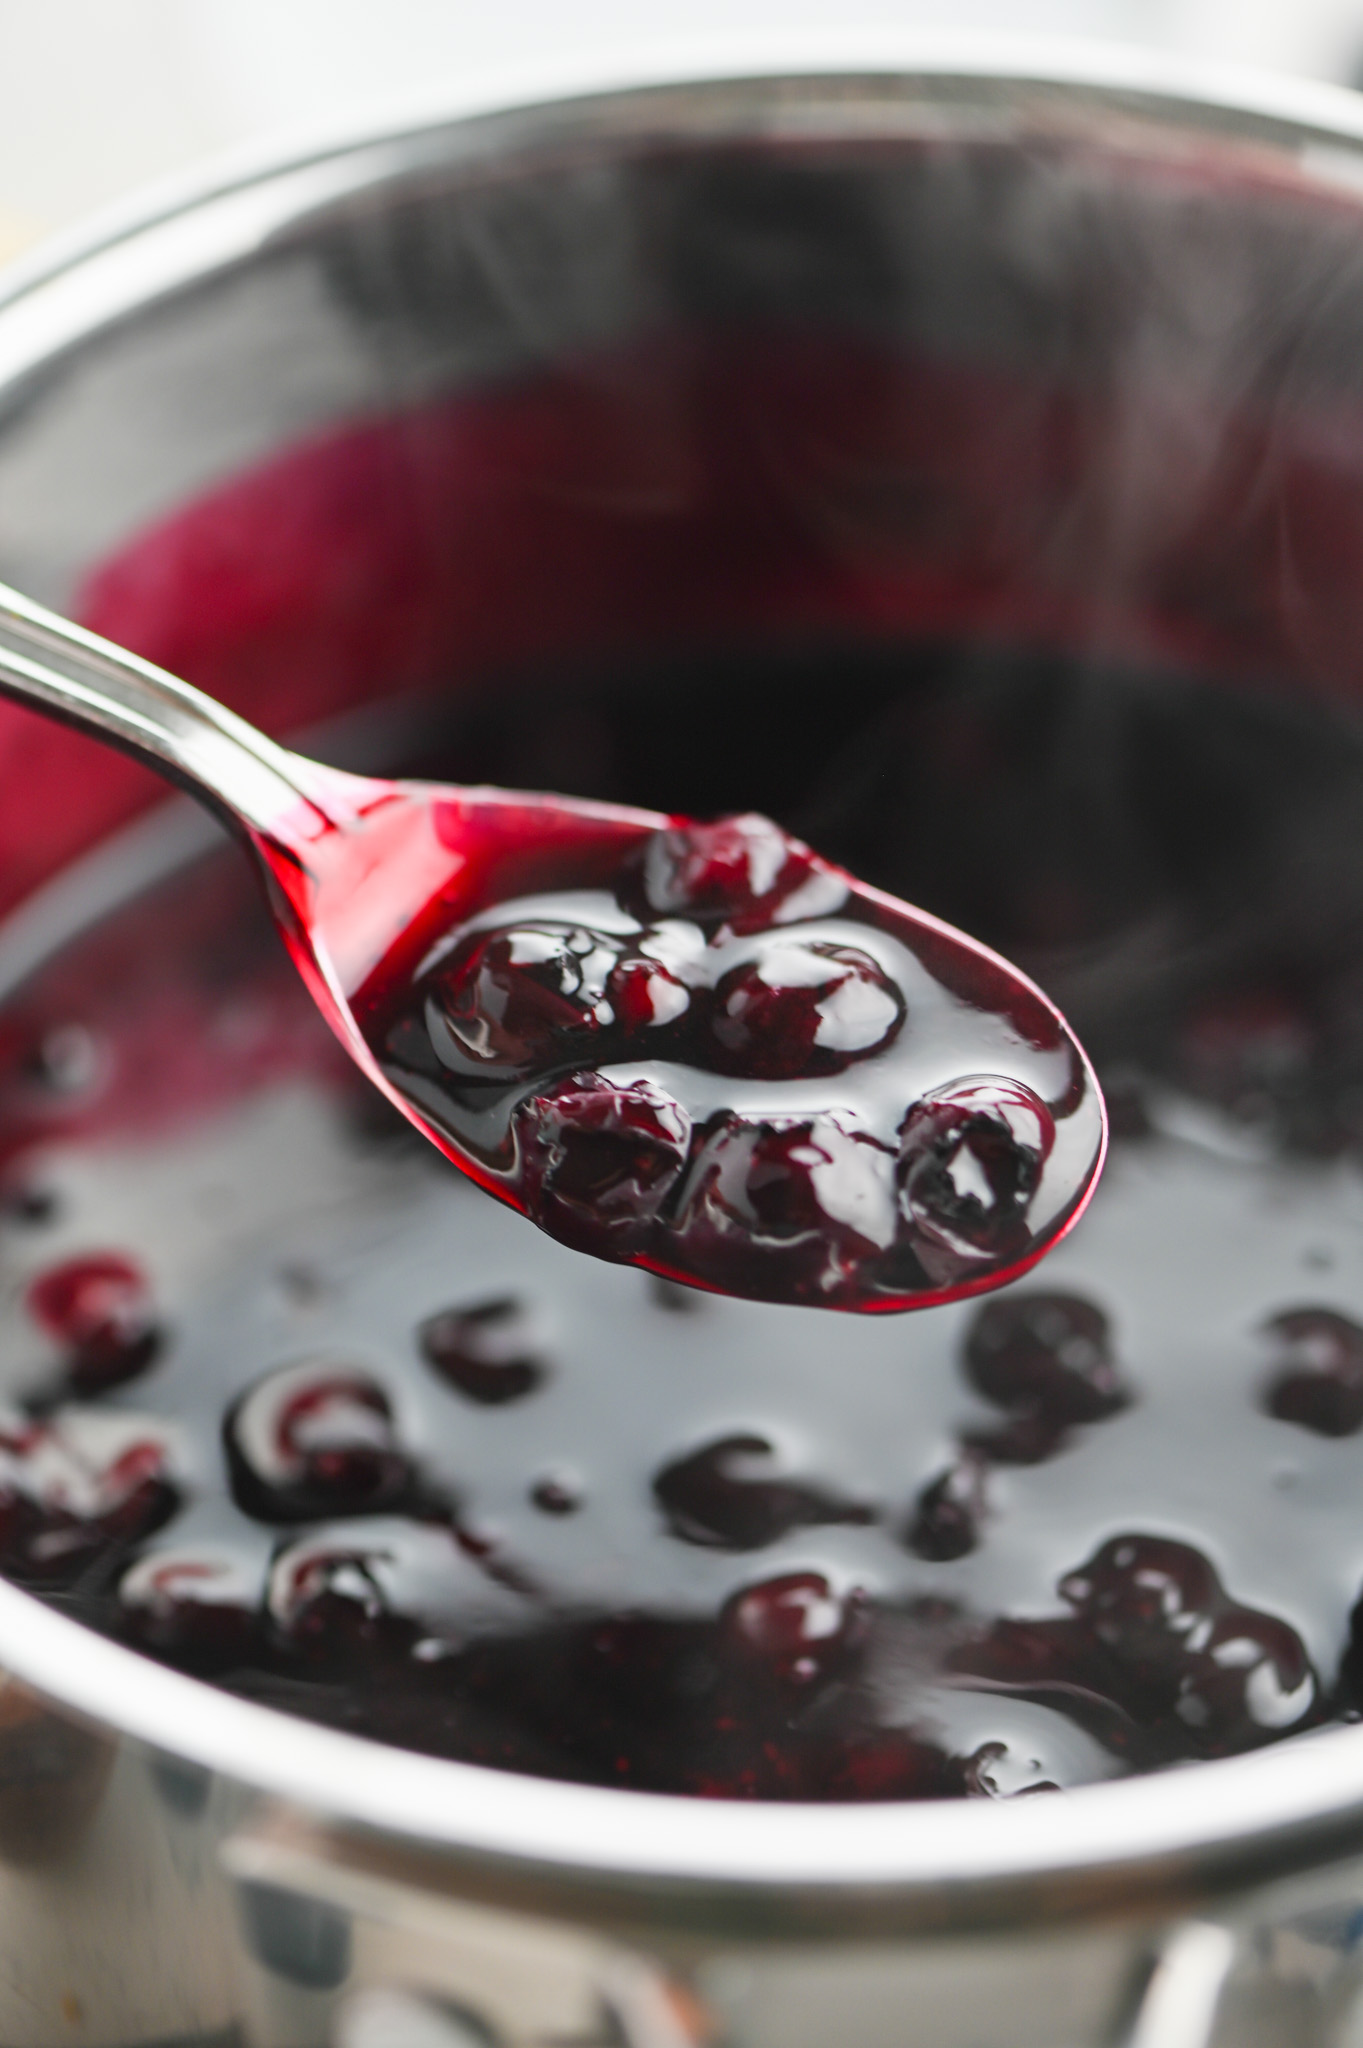 Easy Blueberry Sauce (6 Ingredients) - Sally's Baking Addiction